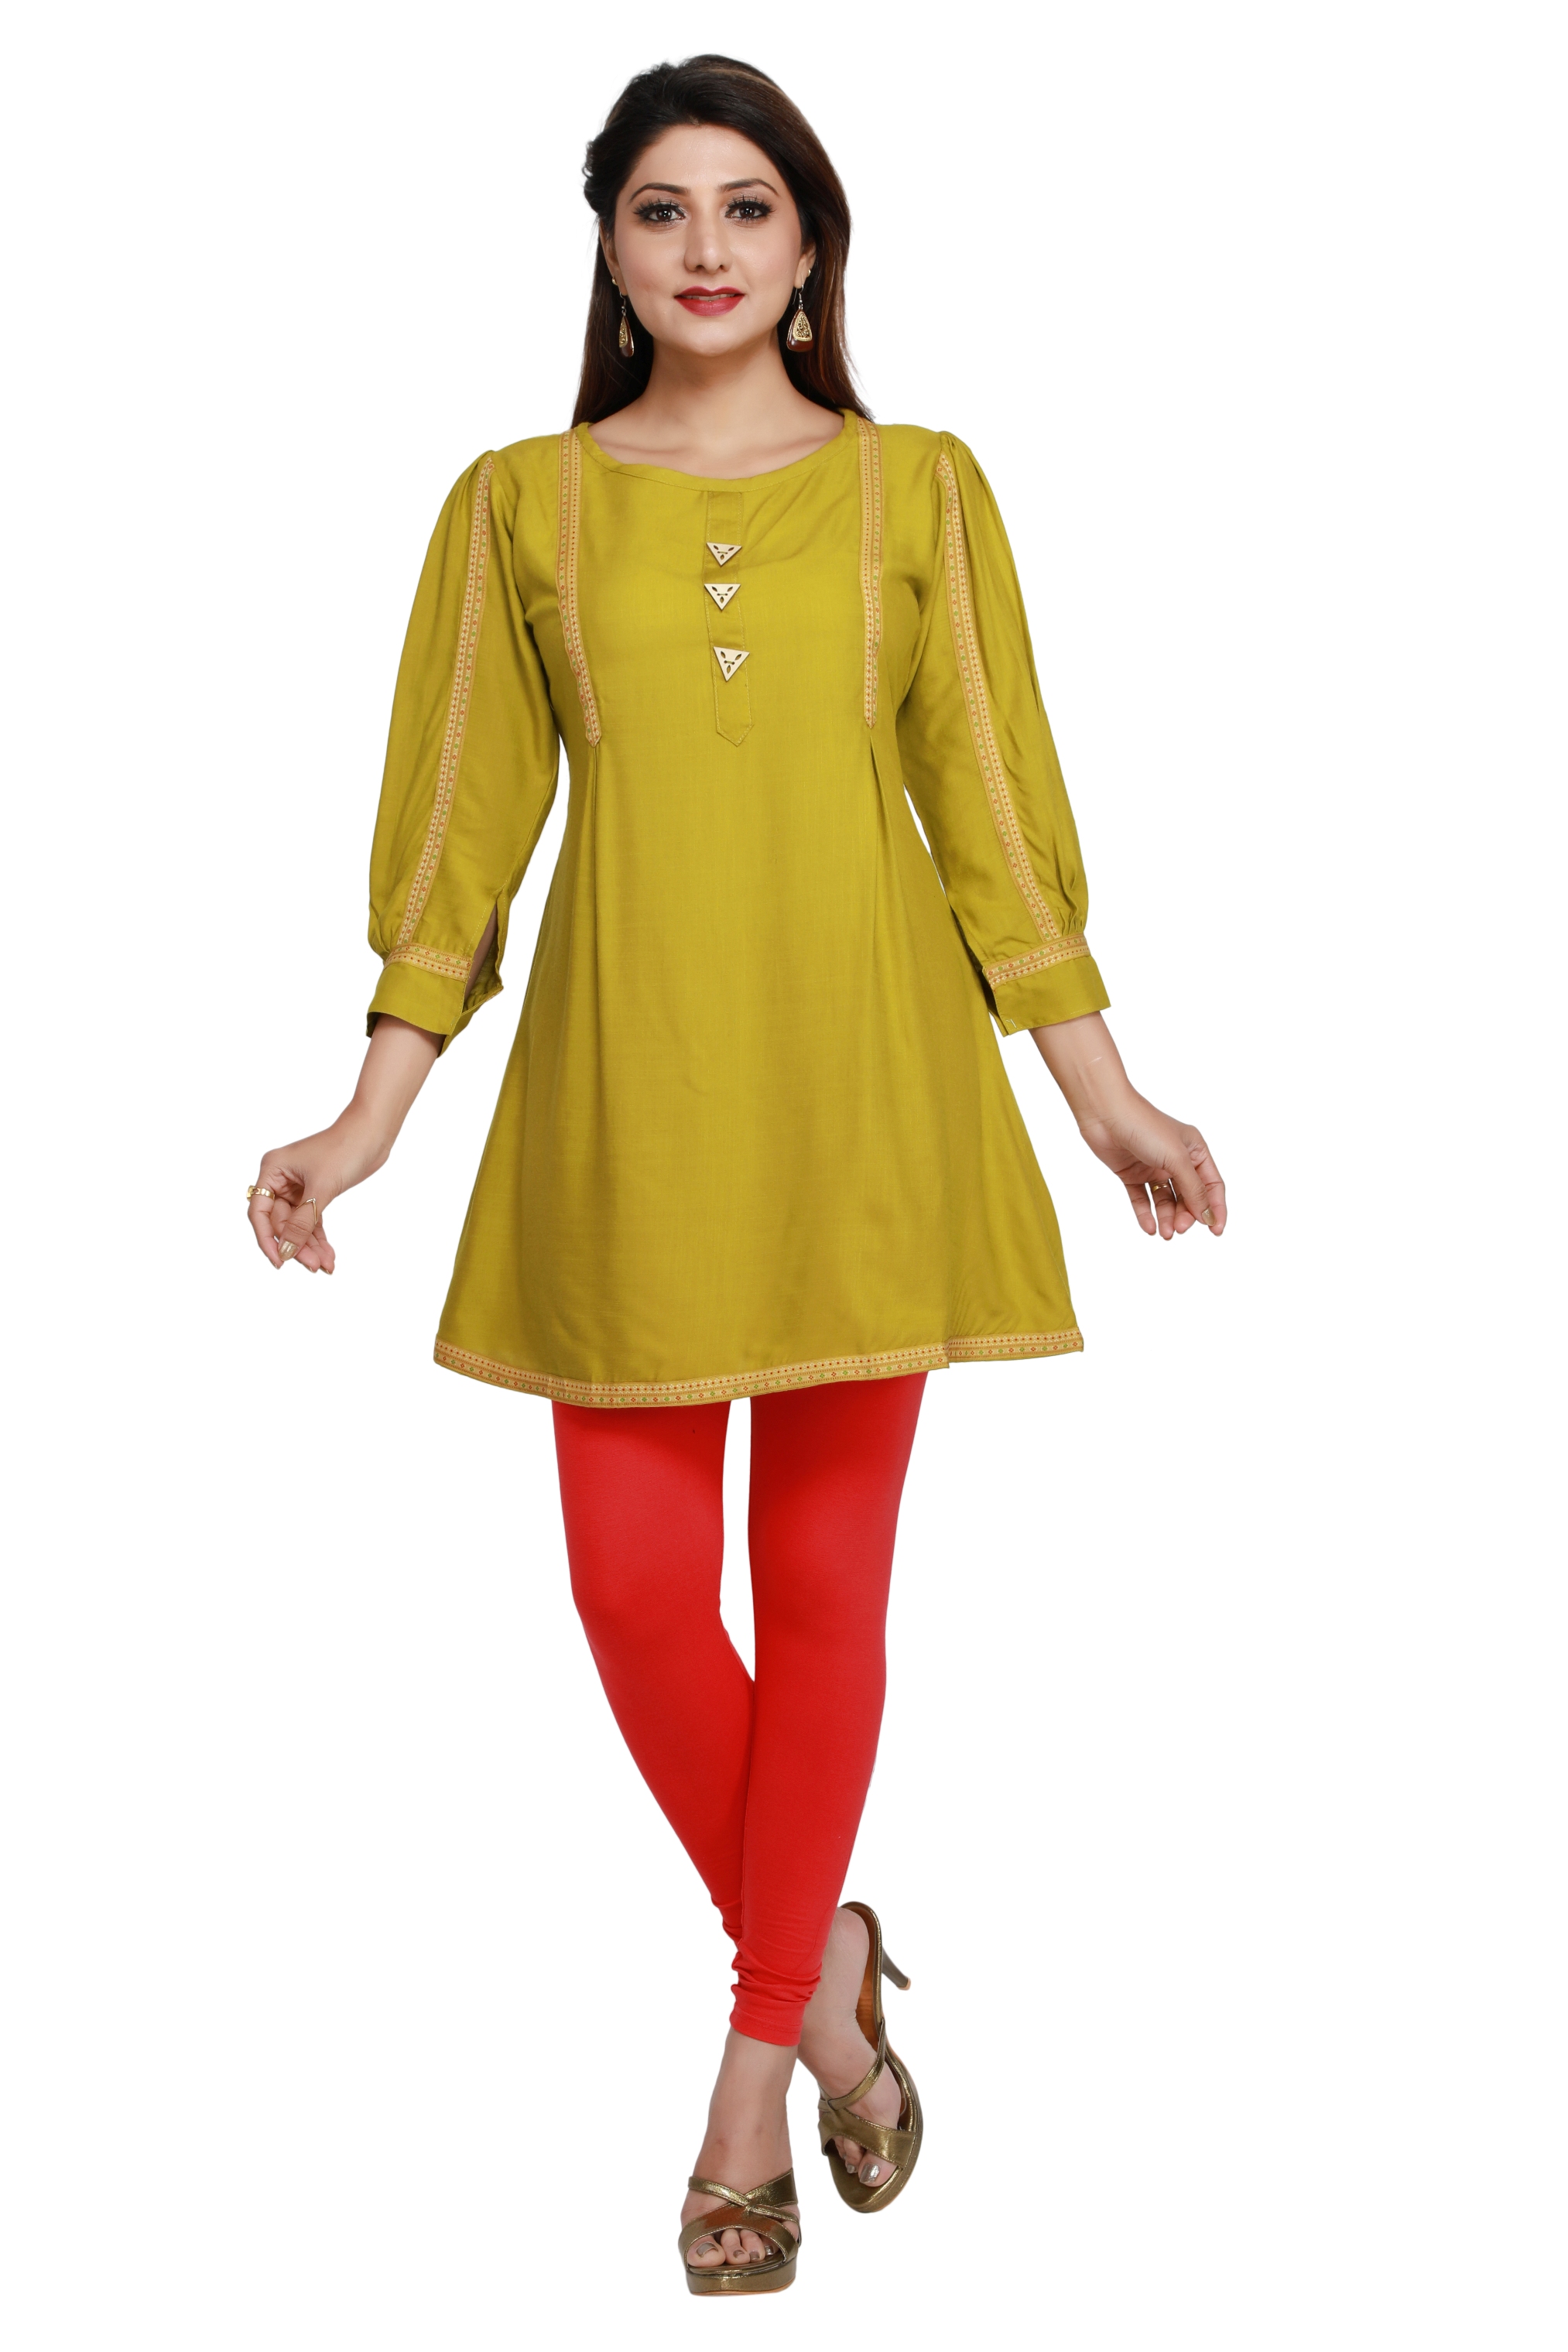 Lemon Yellow Colour Readymade Short Size Cotton Kurti having Lines in  slanding with 3/4th Hand Sleeves